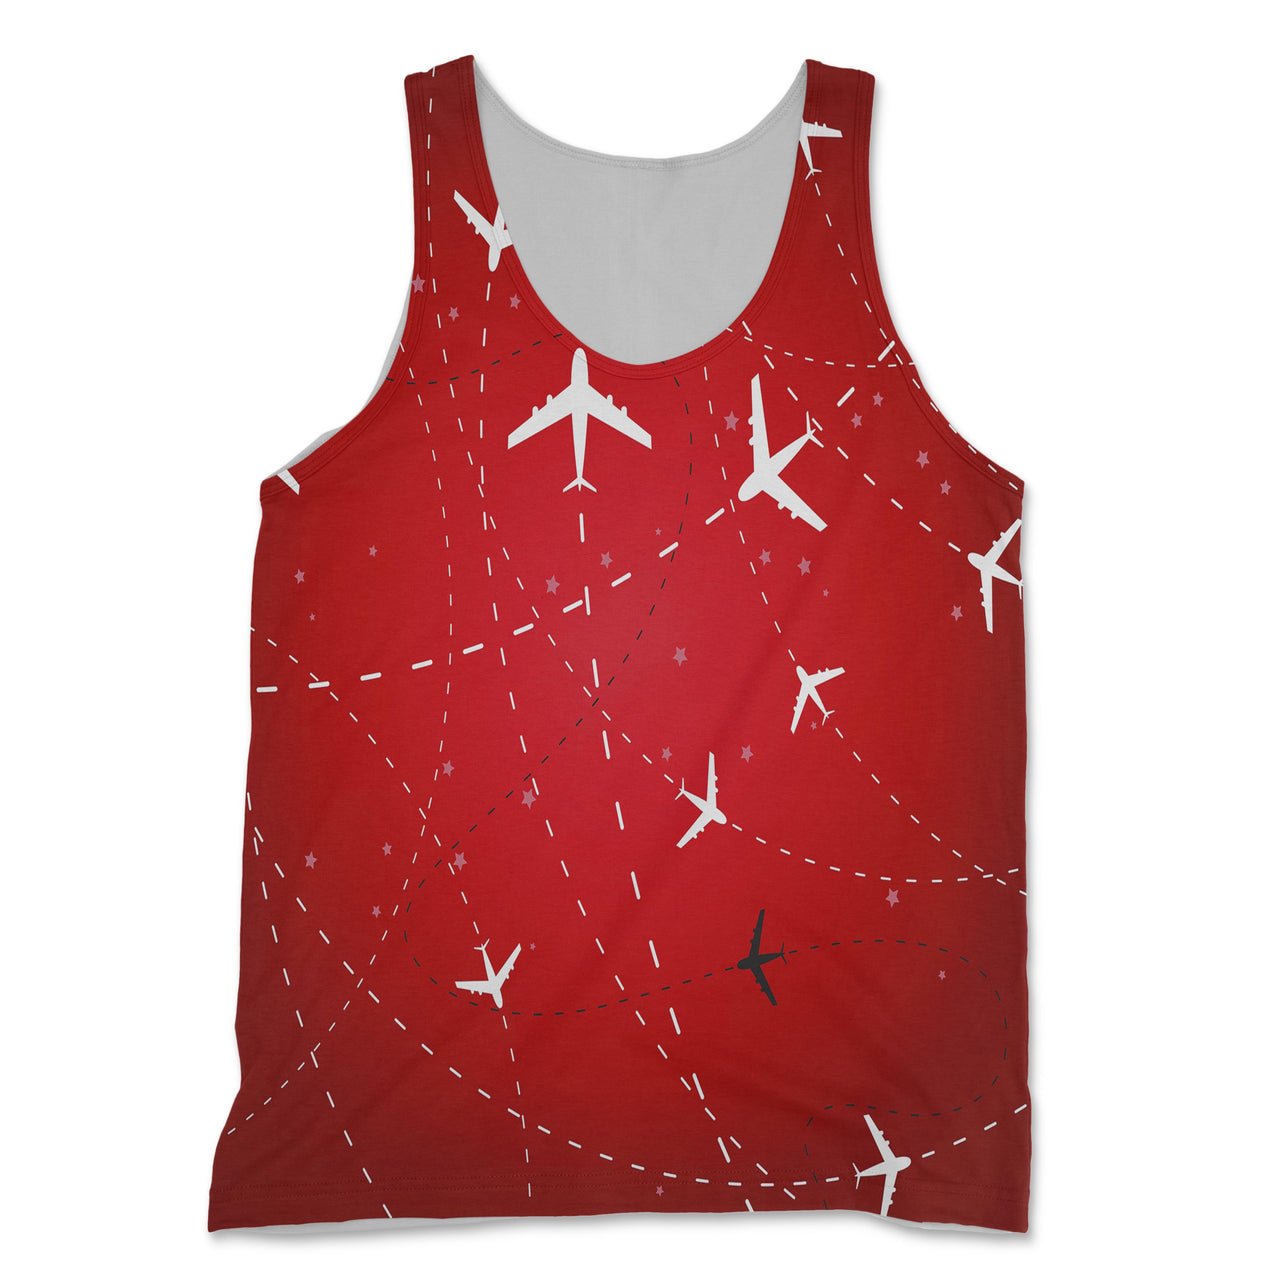 Travelling with Aircraft (Red) Designed 3D Tank Tops